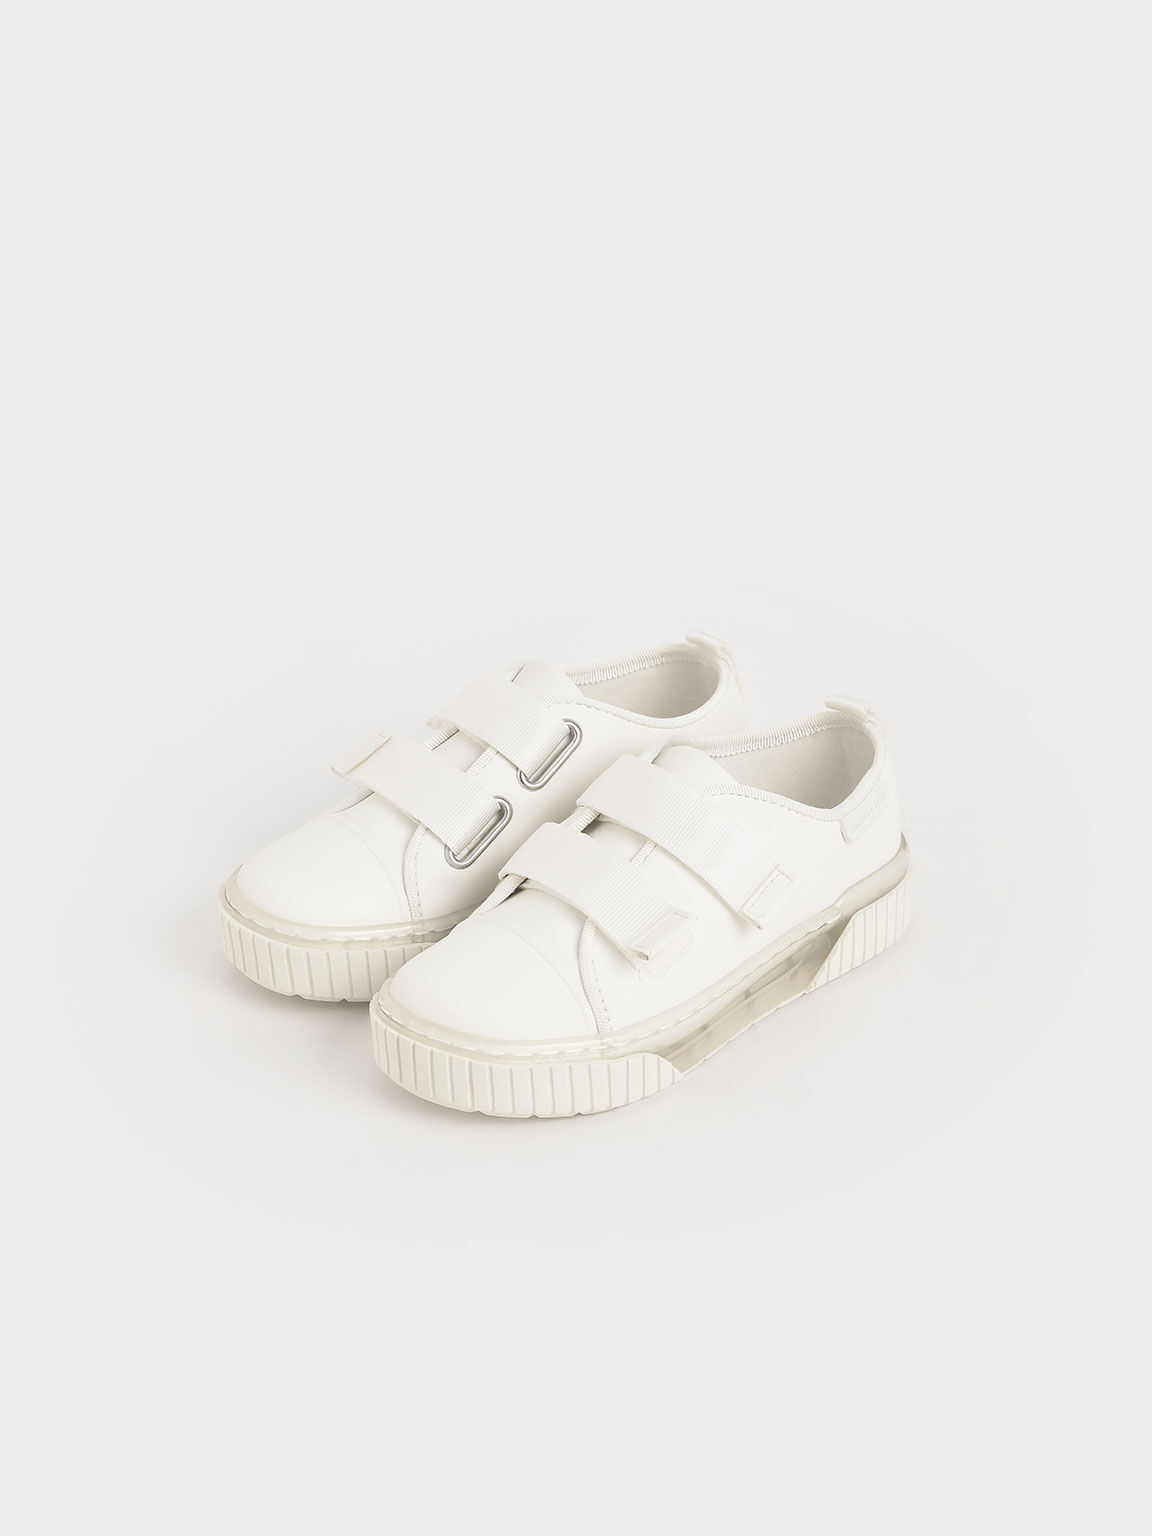 Purpose Collection 2021: Girls' Sneakers, White, hi-res